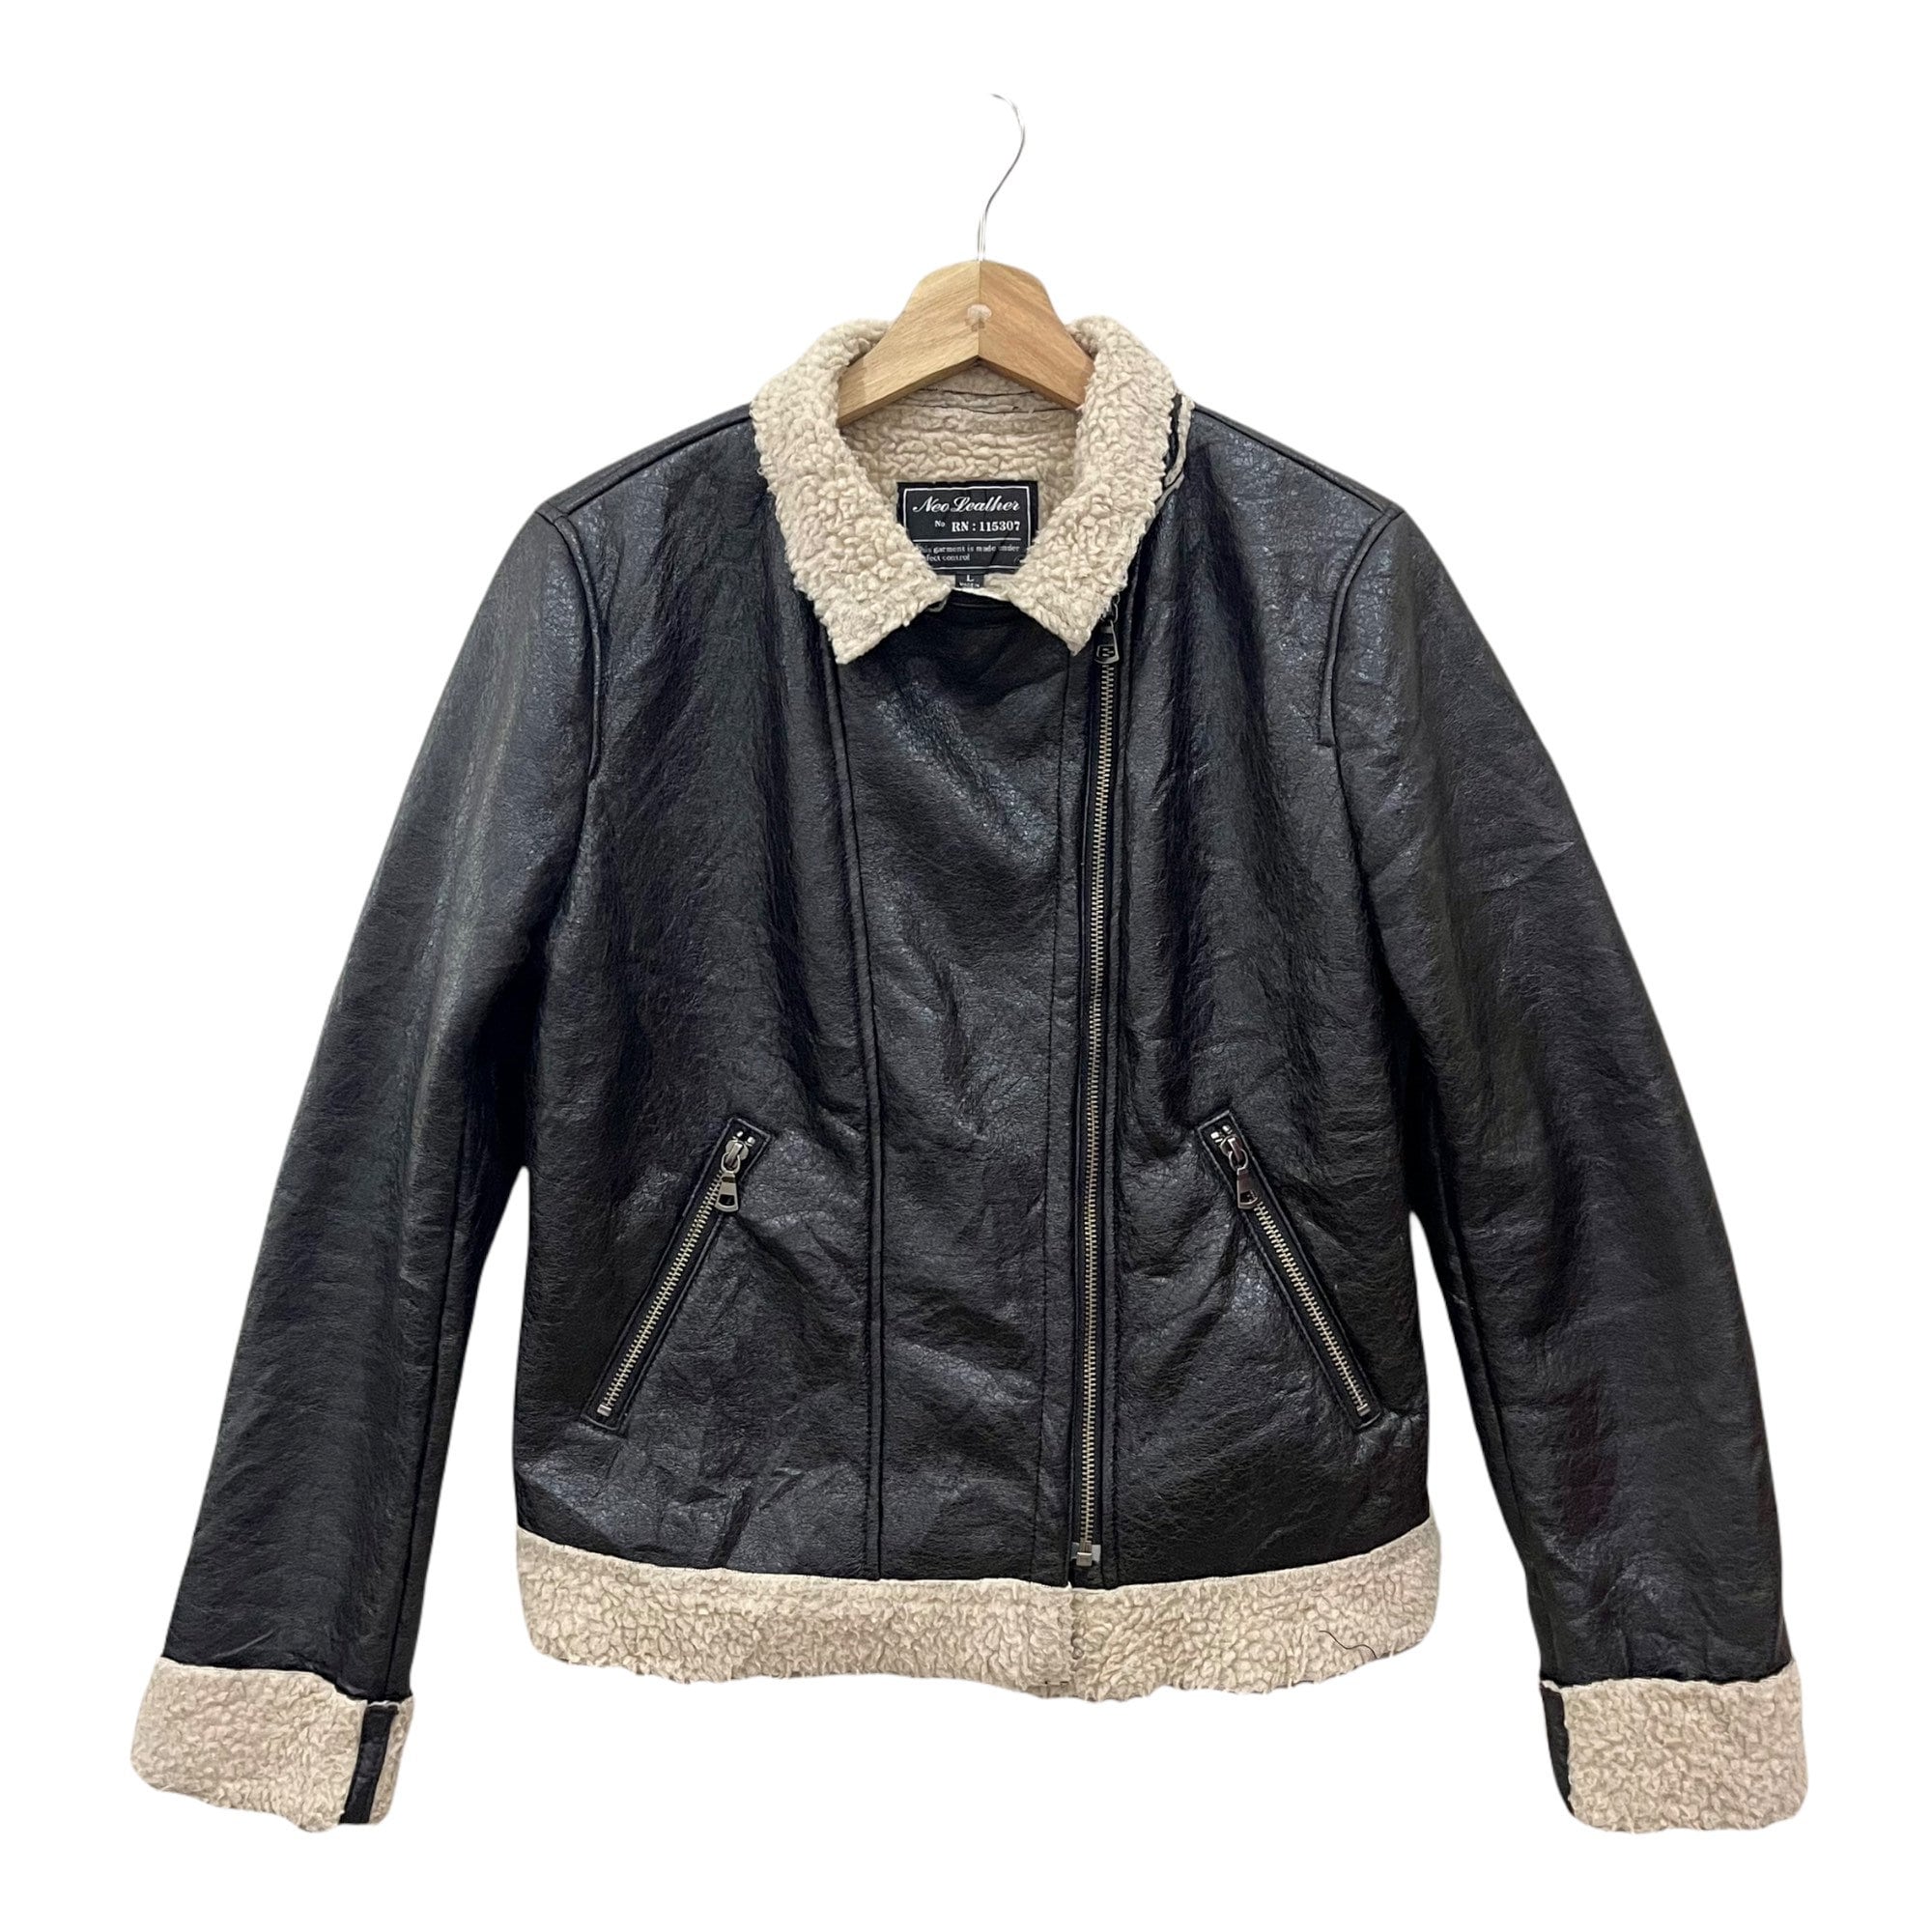 Undercover Undercover X Uniqlo Leather Jacket  Grailed